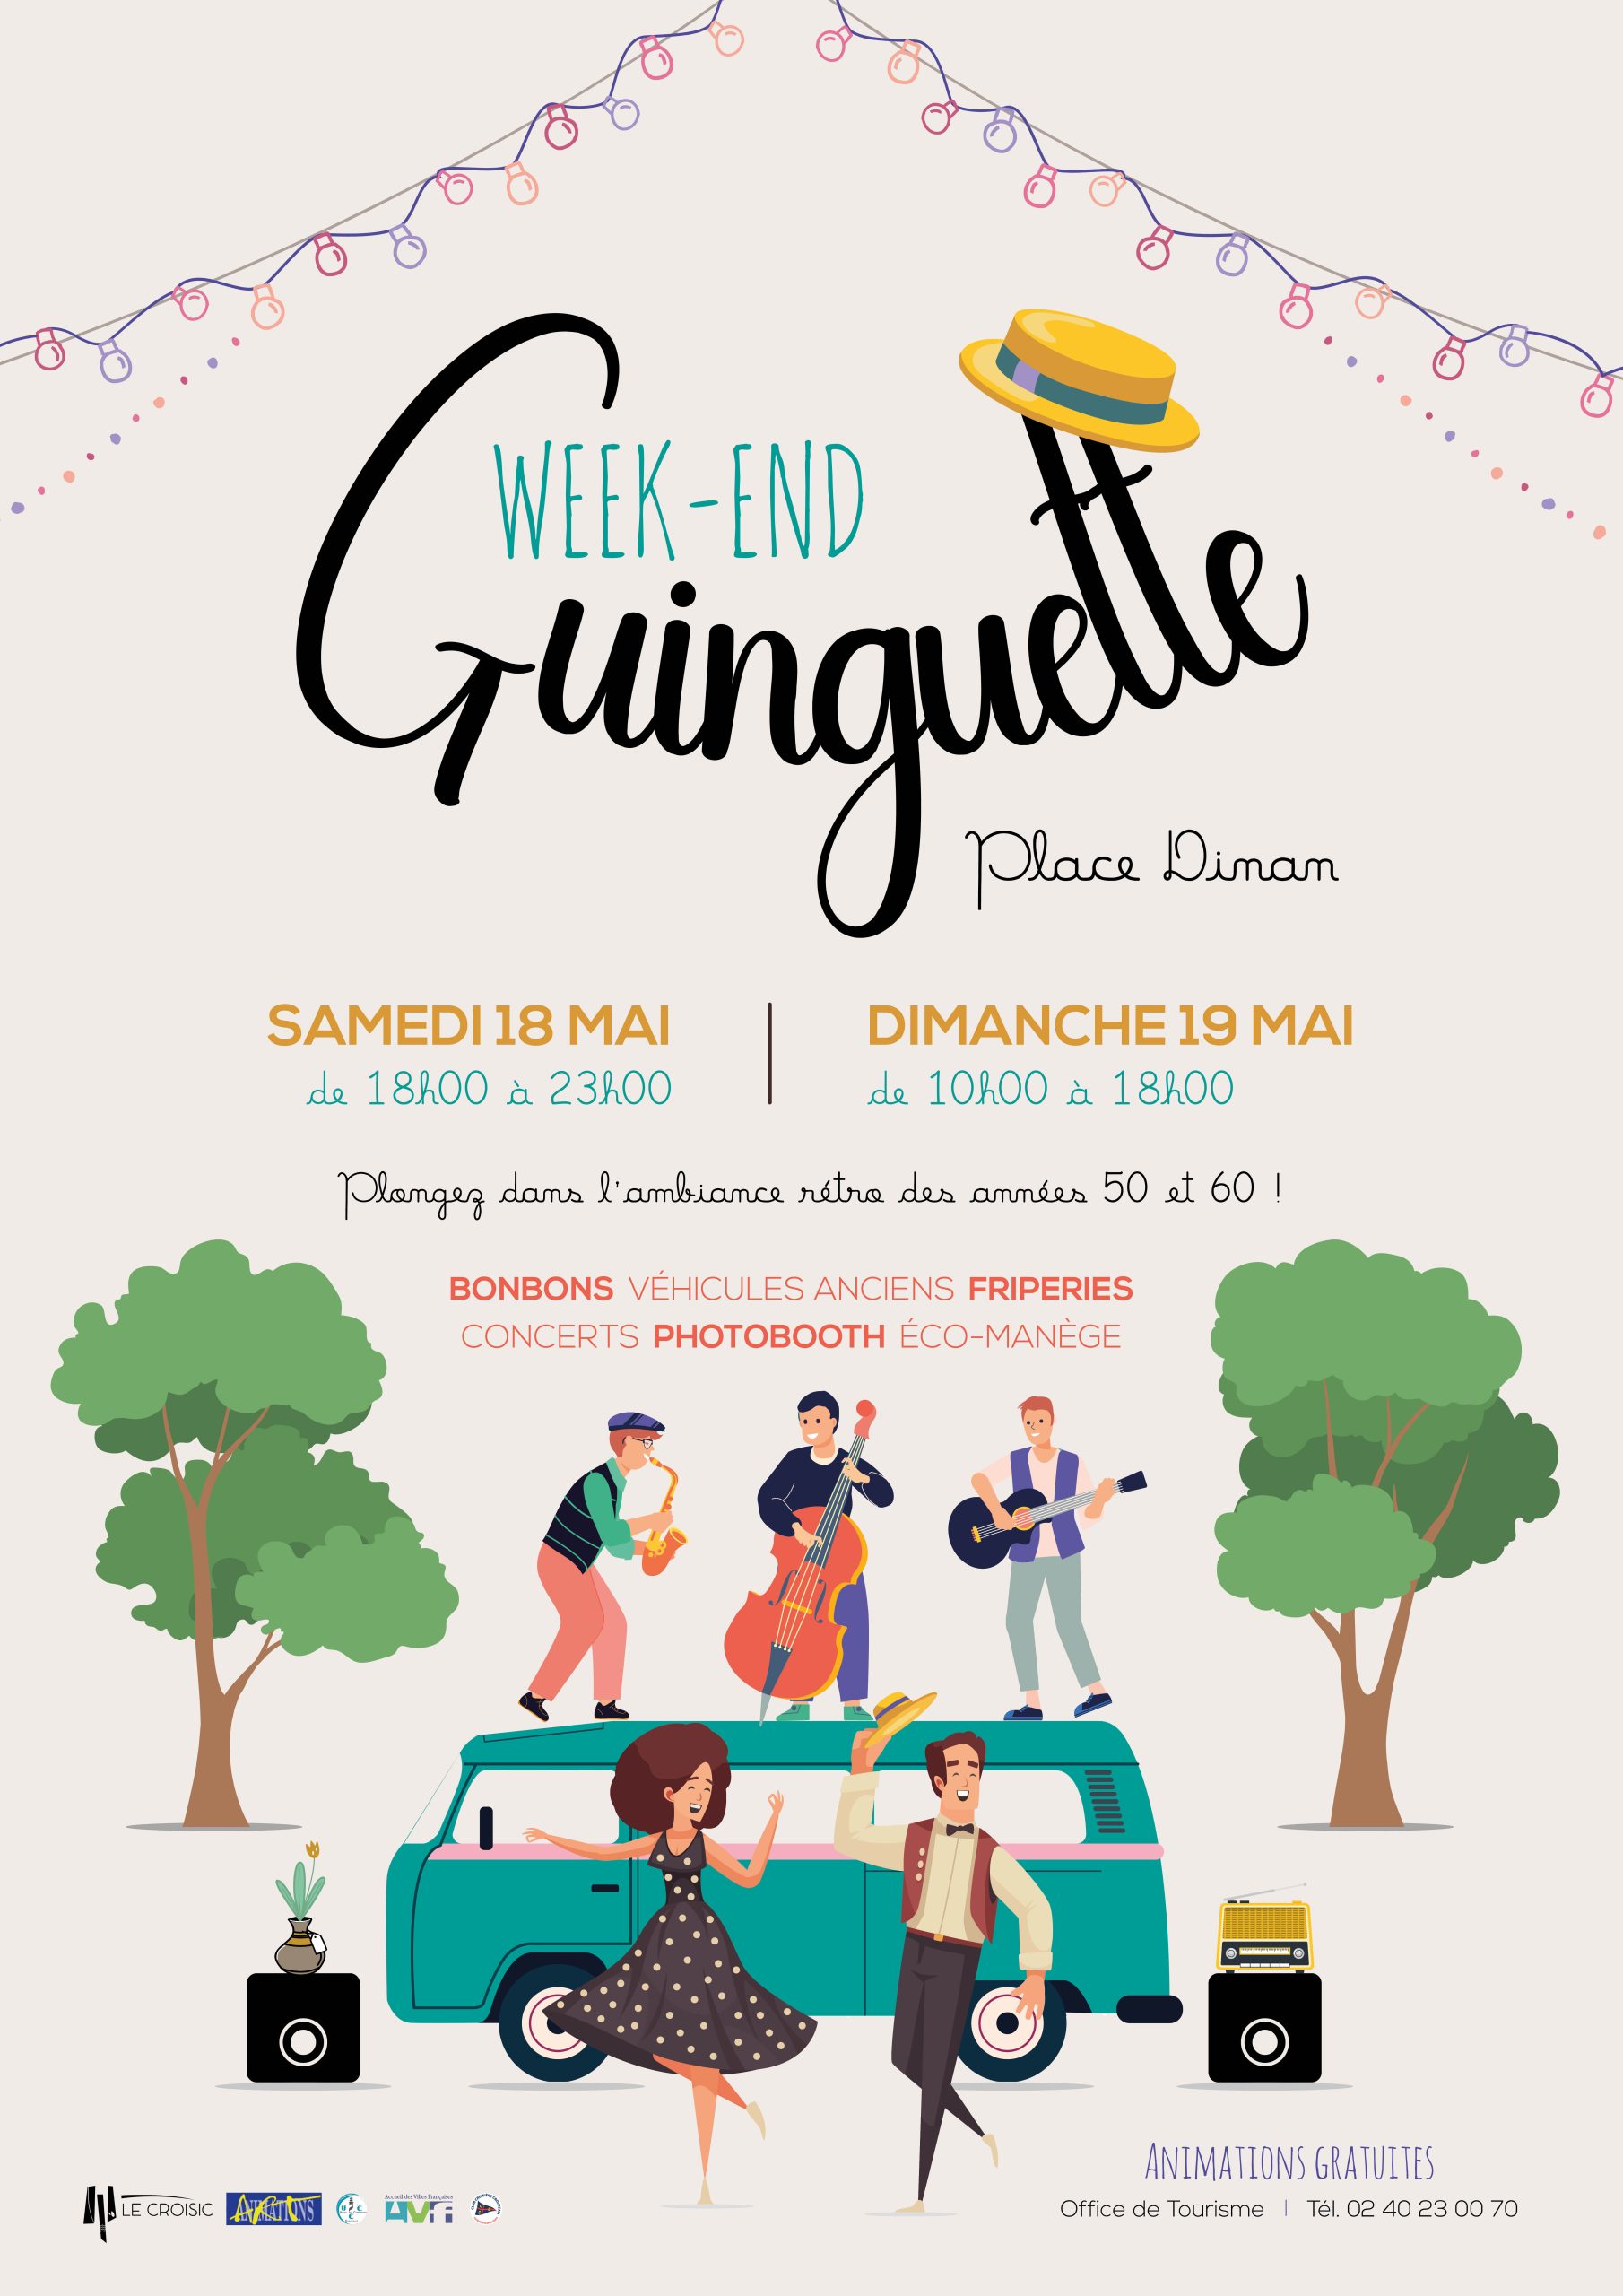 Guinguette weekend 18 p.m. to 23 p.m. Saturday – 10 a.m. to 18 p.m. Sunday